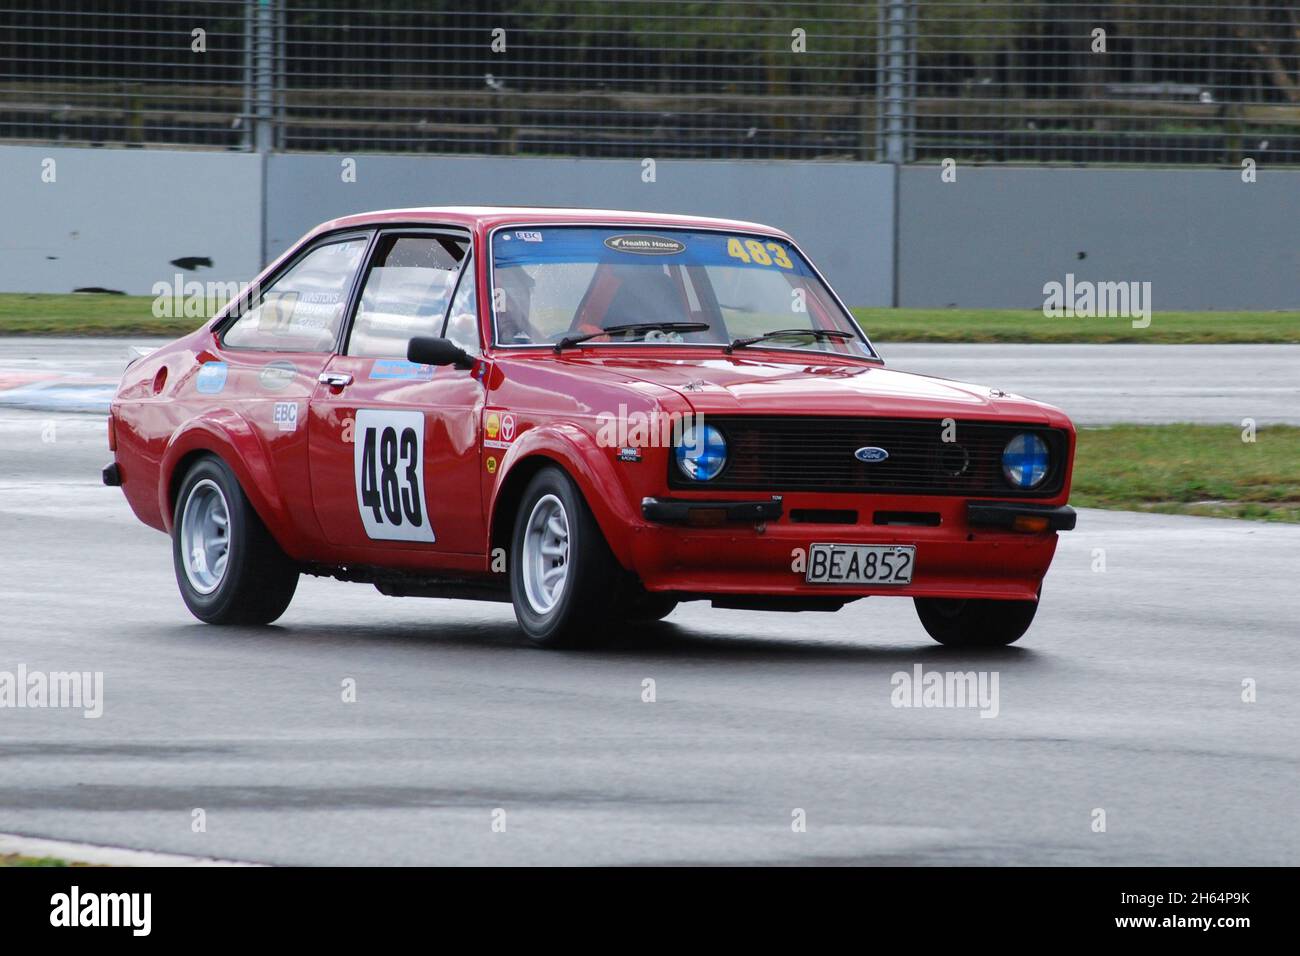 Ford Escort Mk 2 at the new corner at Pukekohe race circuit, south of Auckland, NZ Stock Photo